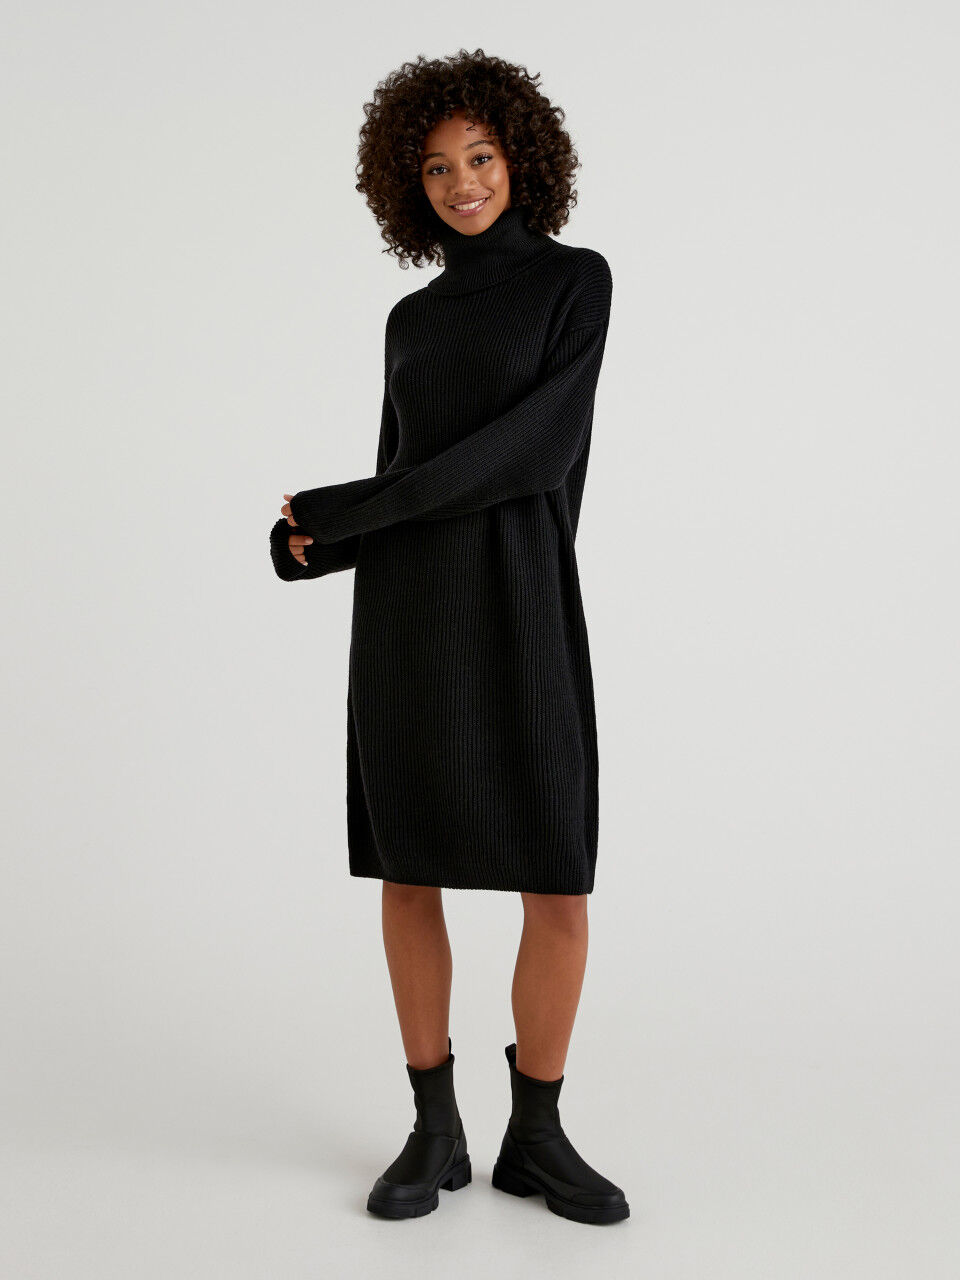 The Merino Wool Dress That Made Me Overpack (Plus 10 Other Picks!)